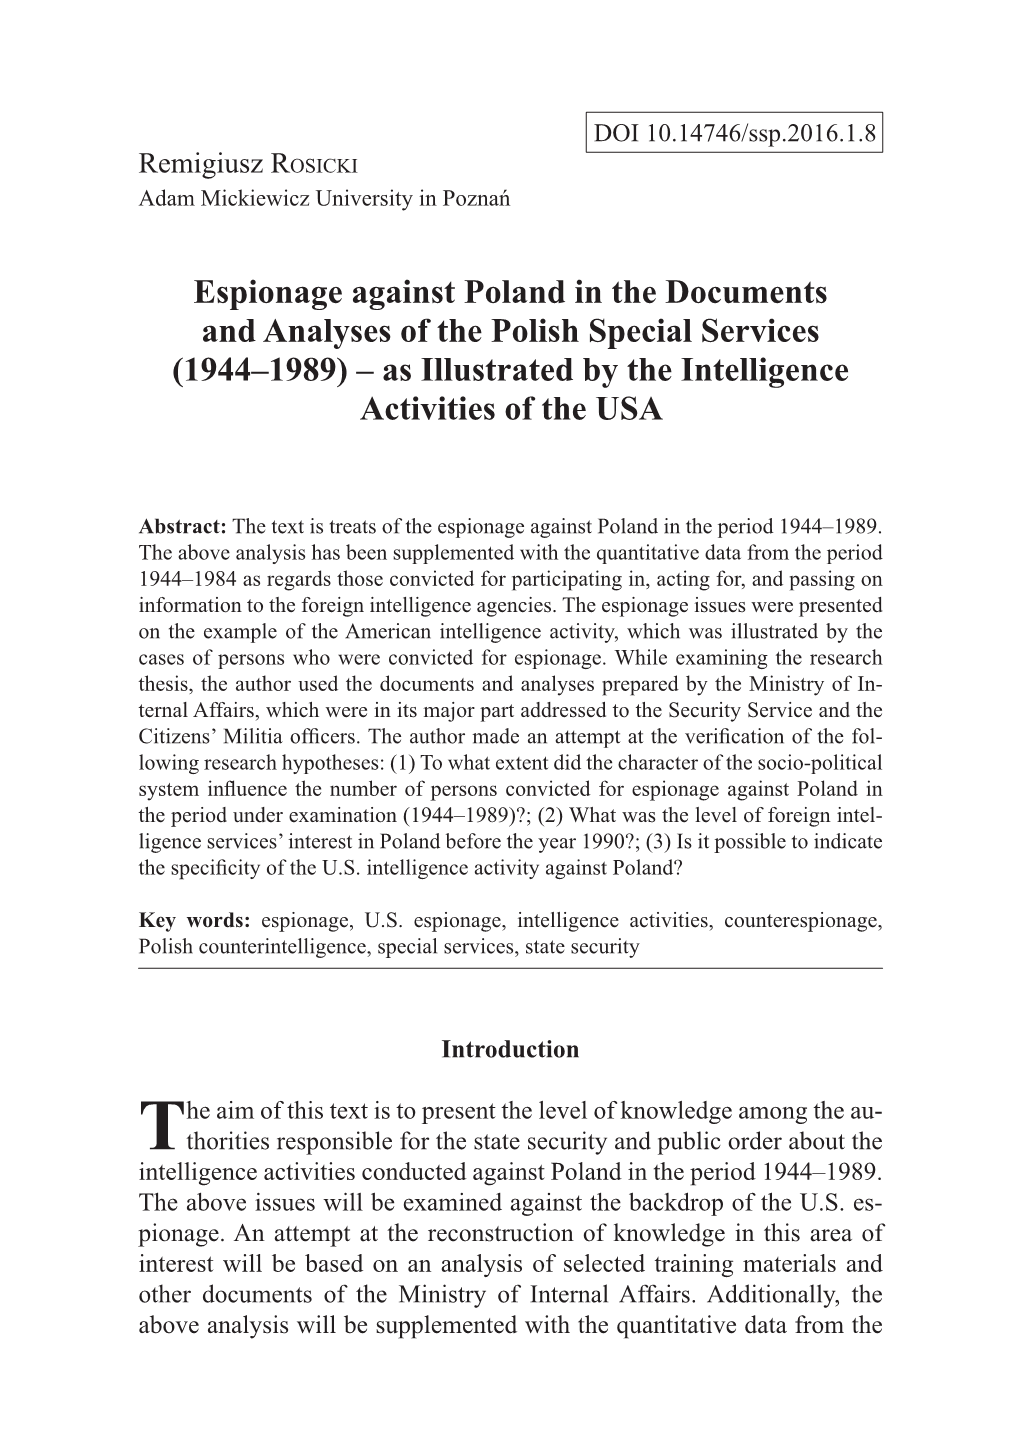 Espionage Against Poland in the Documents and Analyses of the Polish Special Services (1944–1989) – As Illustrated by the Intelligence Activities of the USA